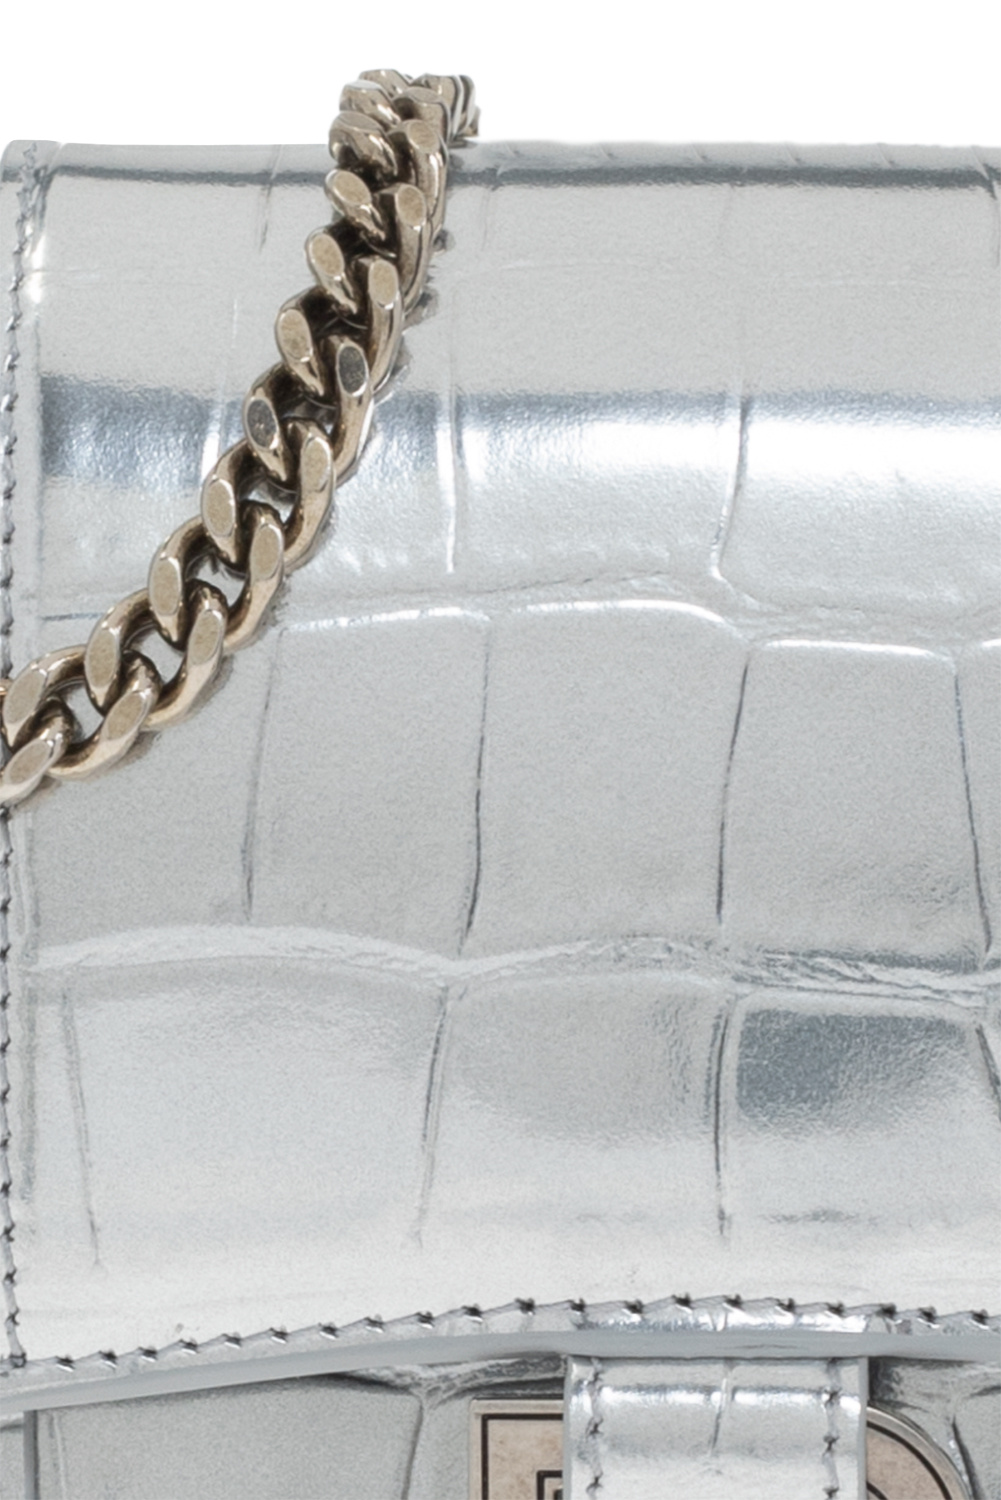 Balenciaga Hourglass Silver Croc Embossed Leather Chain Wallet Bag New